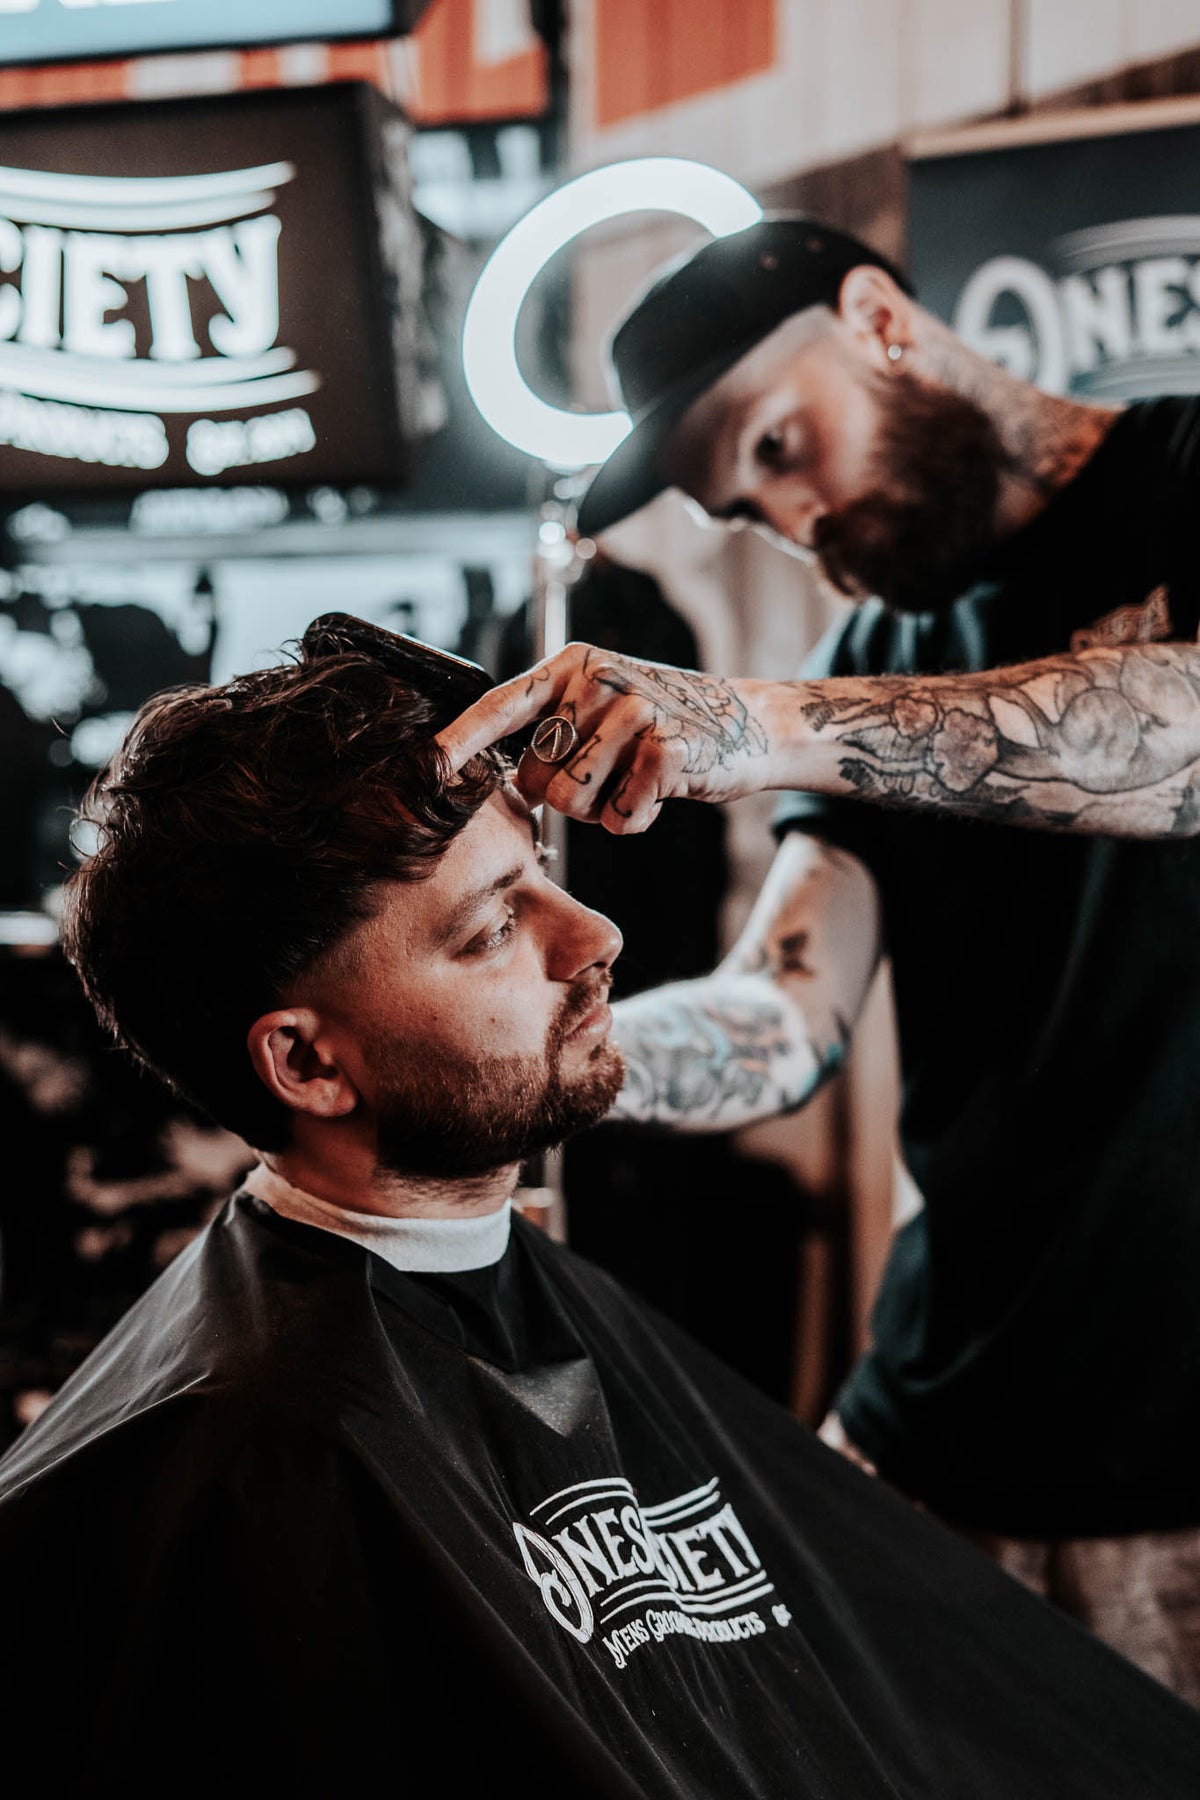 The Best Products To Stock In Barber Shop, Tattooist shop products made in the UK. Vegan Friendly. Your Customers deserve the best. Shop our range of hair styling, skin care, shave barber grade products.